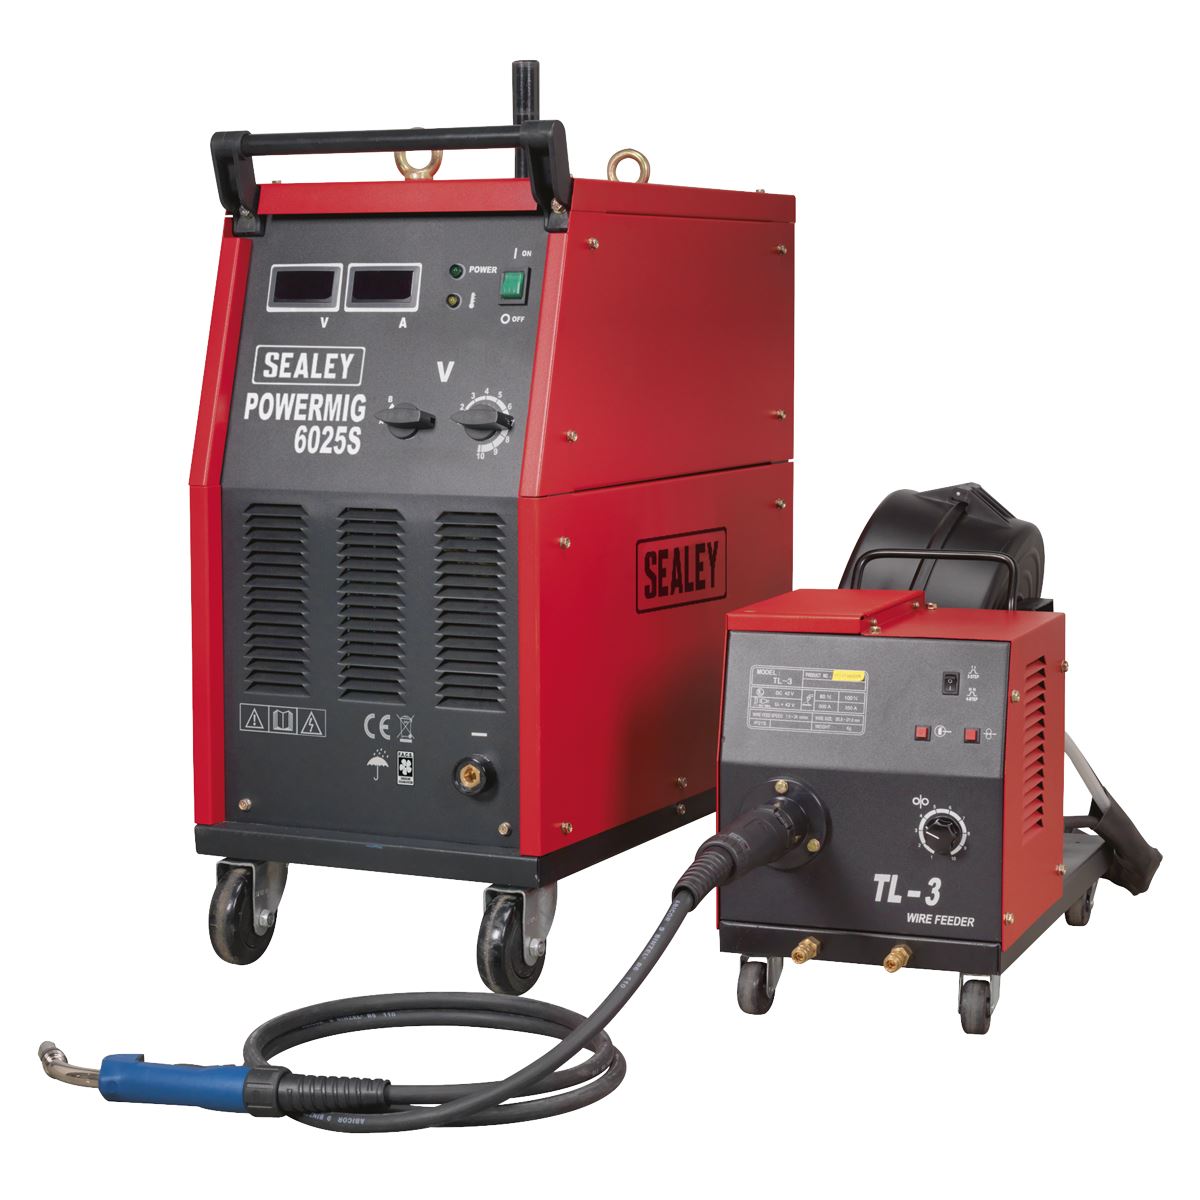 Sealey Professional MIG Welder 250A 415V 3ph with Binzel® Euro Torch & Portable Wire Drive